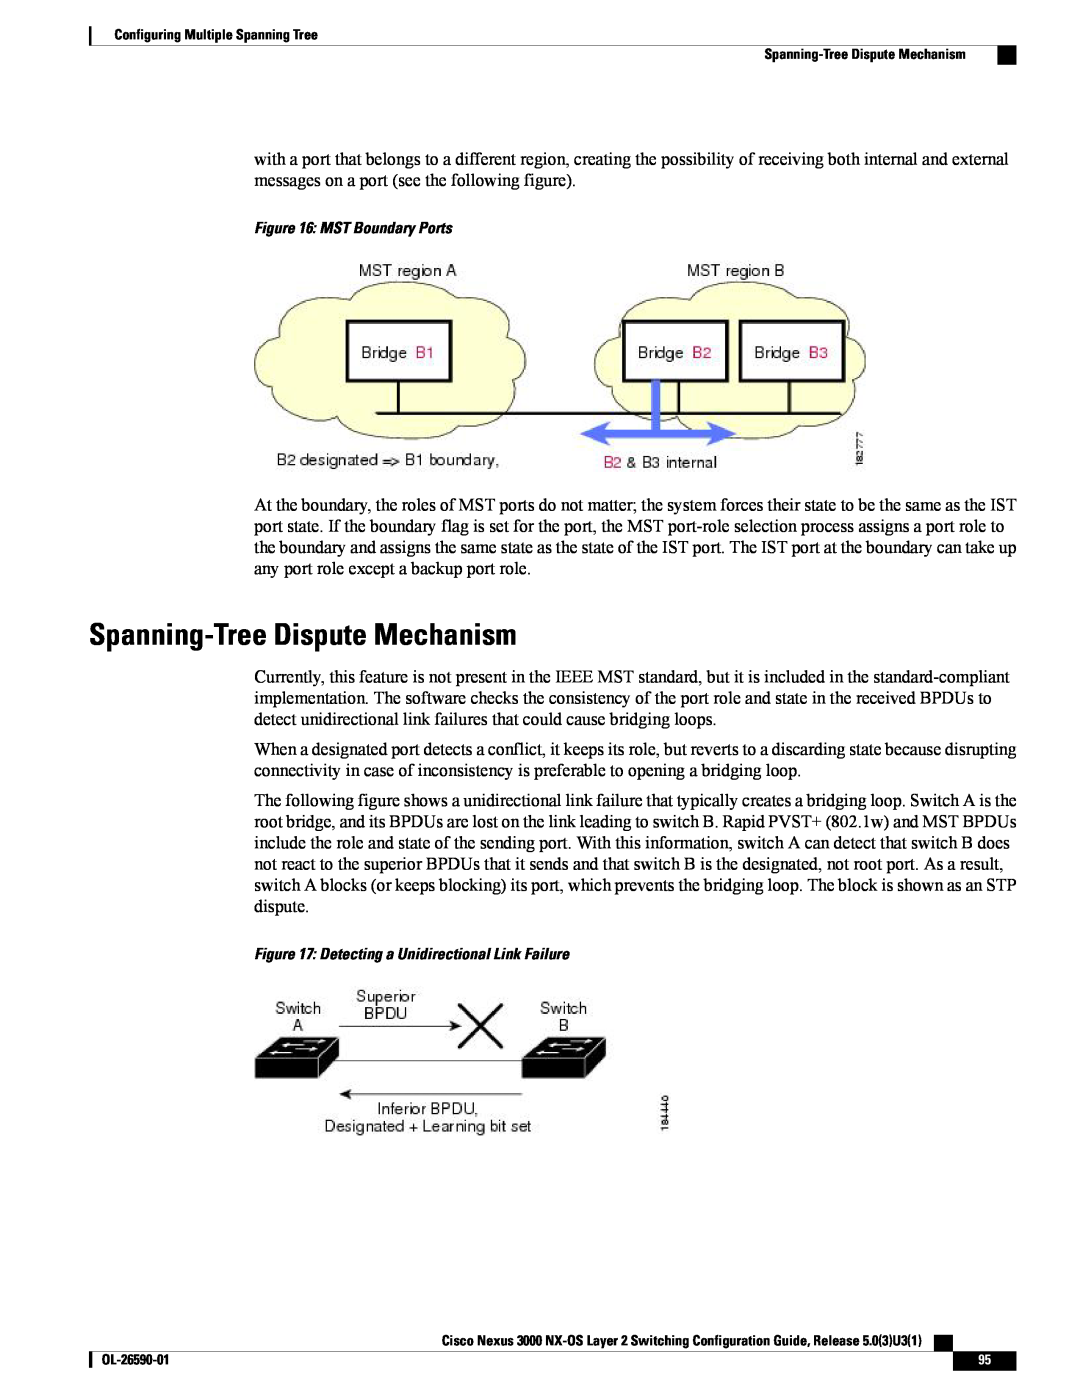 Cisco Systems N3KC3064TFAL3 Spanning-Tree Dispute Mechanism, MST Boundary Ports, Detecting a Unidirectional Link Failure 